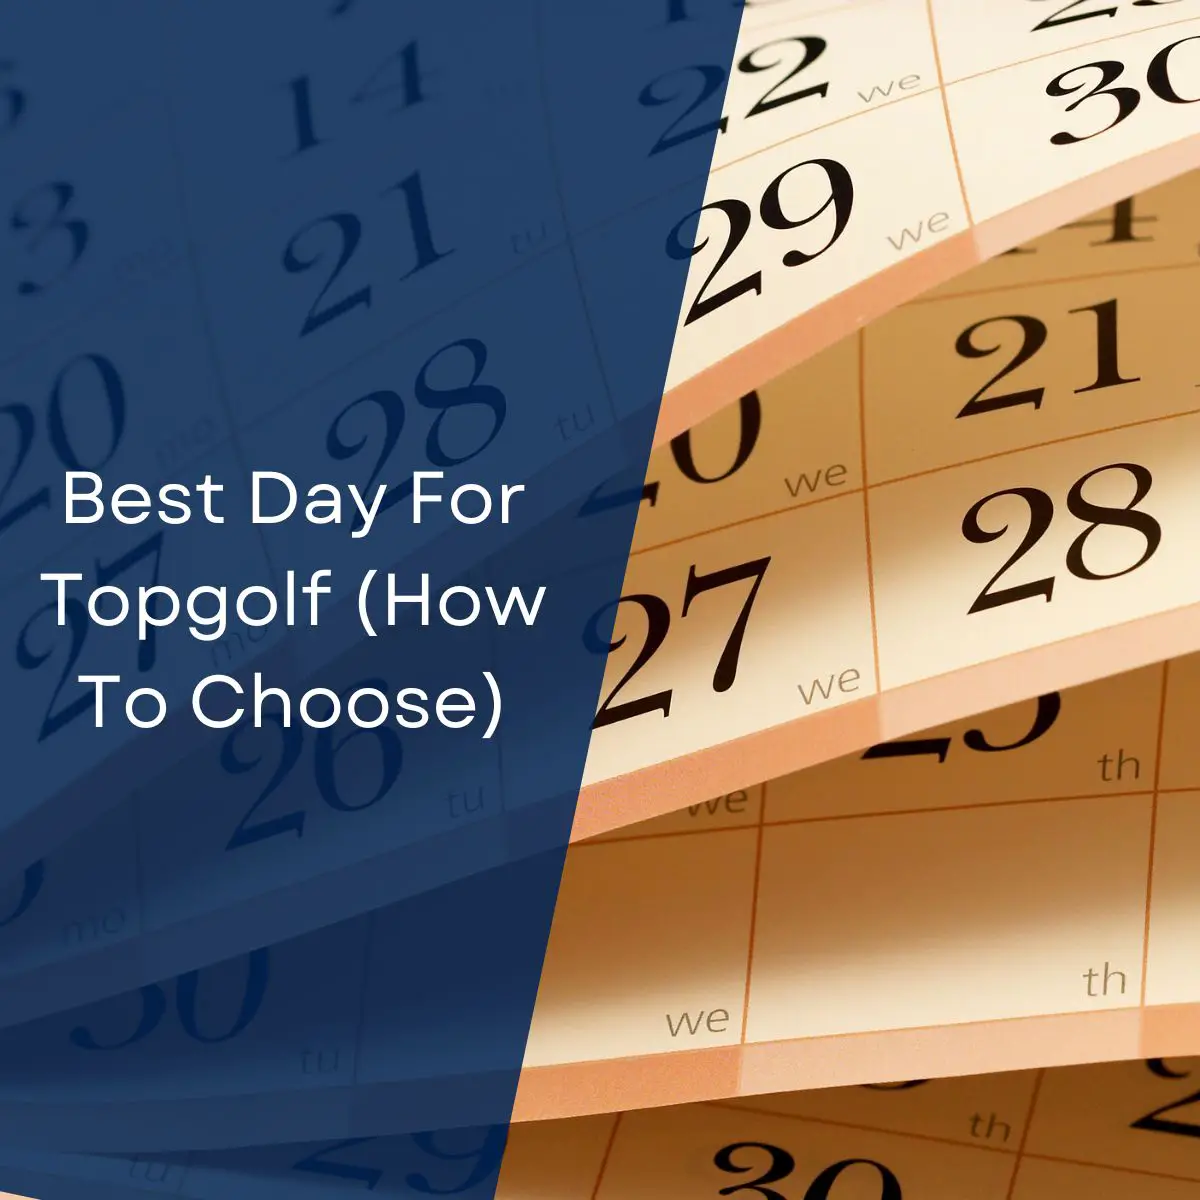 Best Day For Topgolf (How To Choose)